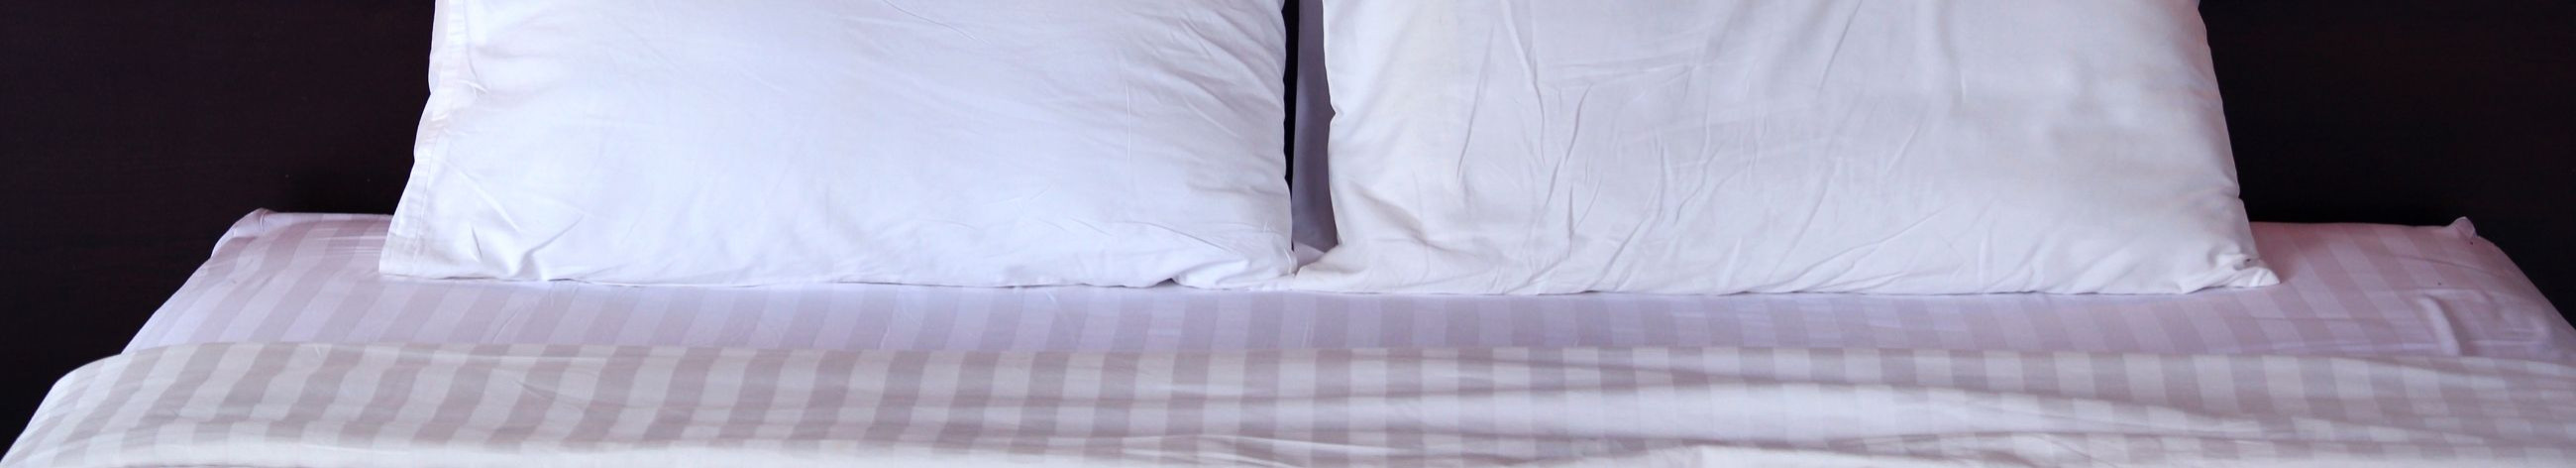 hotel bedding, medical fabric suppliers, wholesale fabric for patient clothing, waterproof textile products, healthcare bedding supplies, patient's clothing, wholesale of medical fabrics, incontinence textiles, wholesale of medical fabrics, patient's clothing